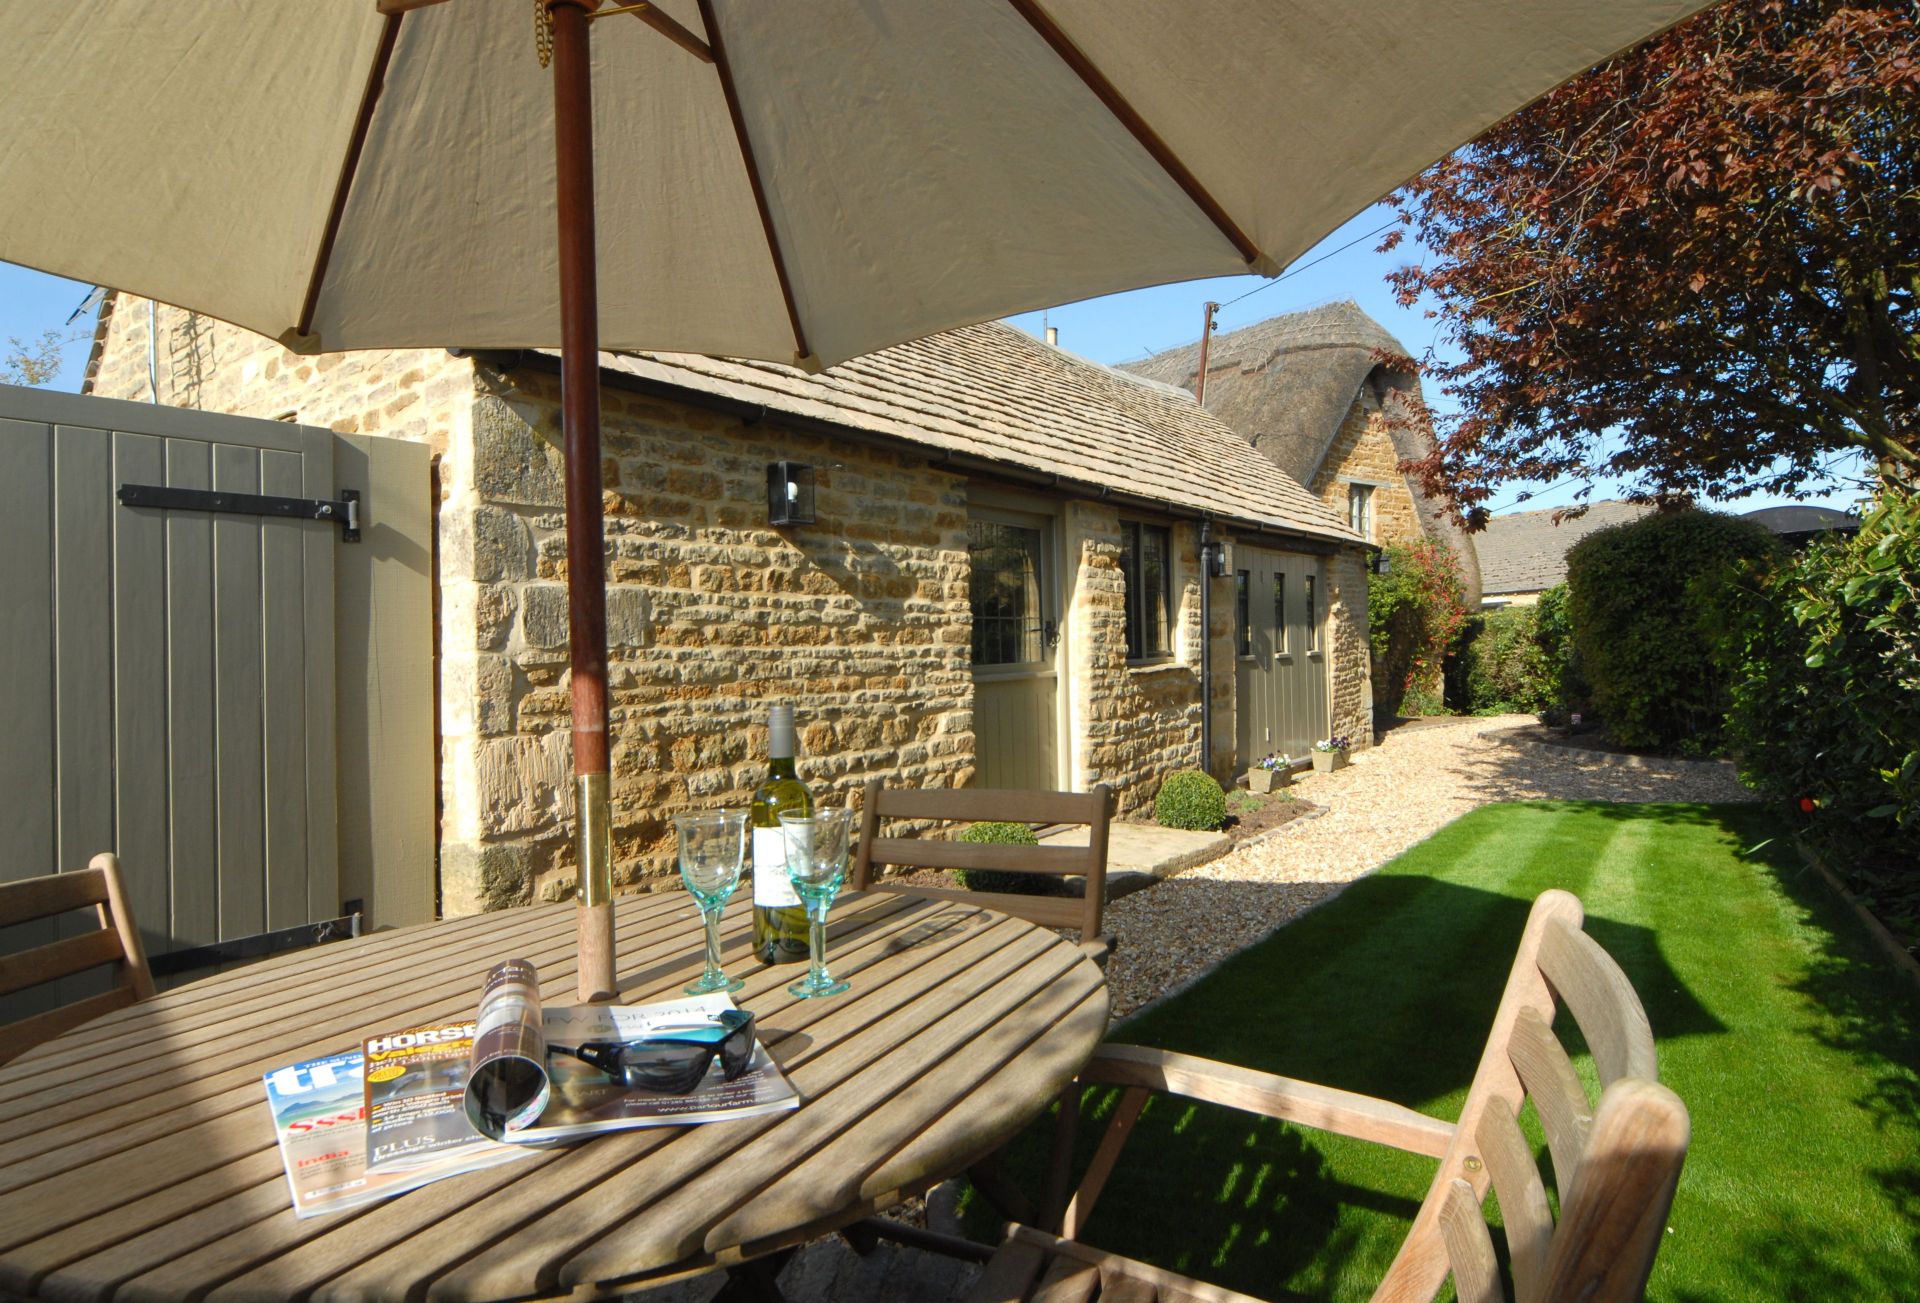 More information about The Old Smithy - ideal for a family holiday